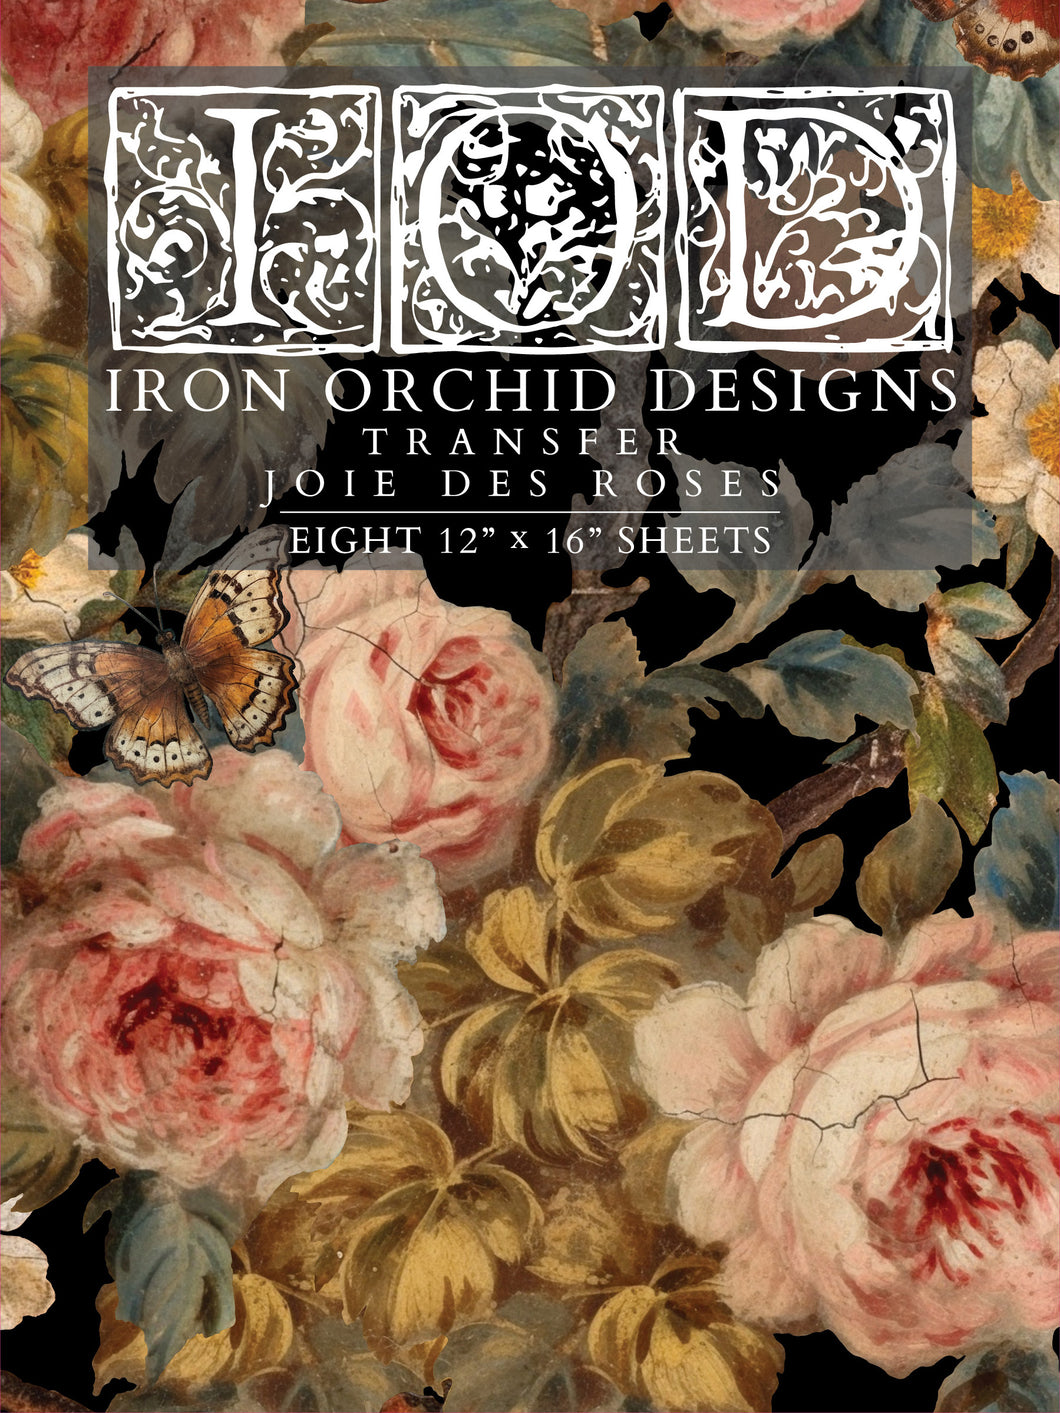 Joie des Roses - 8 Page Iron Orchid Designs Decor Transfer™